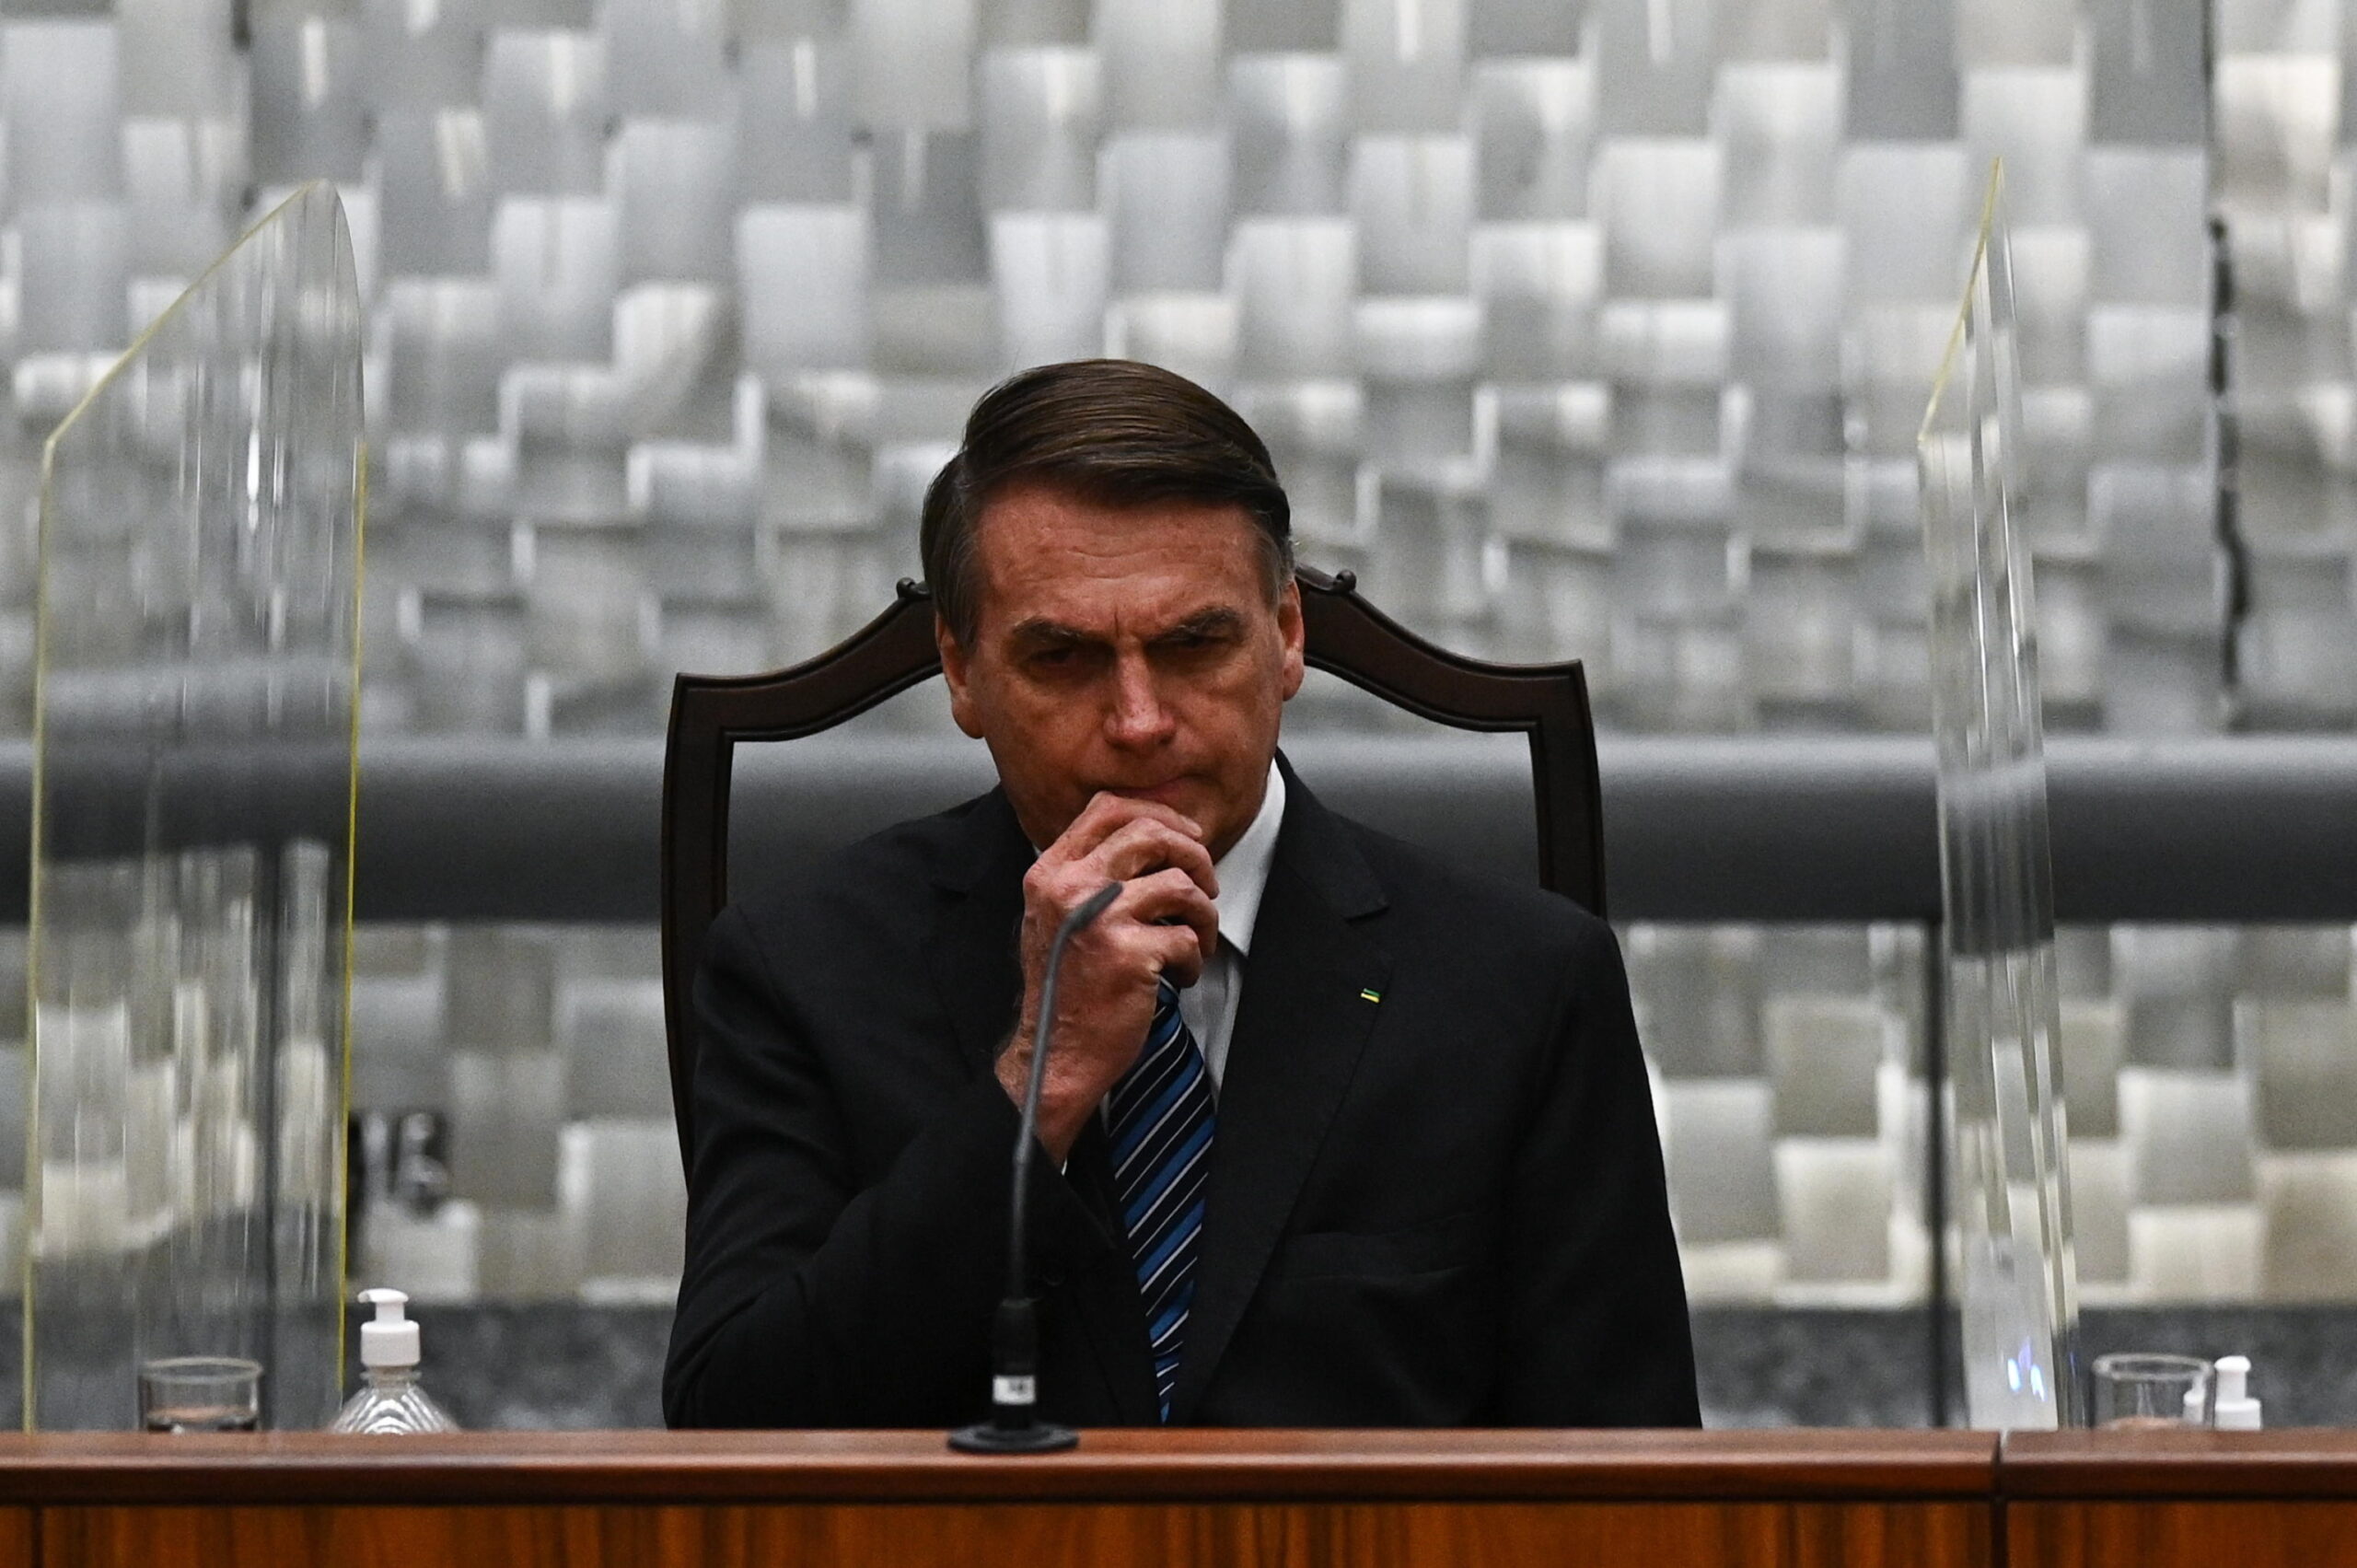 Assault on Planalto, Bolsonaro breaks the silence: “The invasion of buildings in Brasília was something incredible”